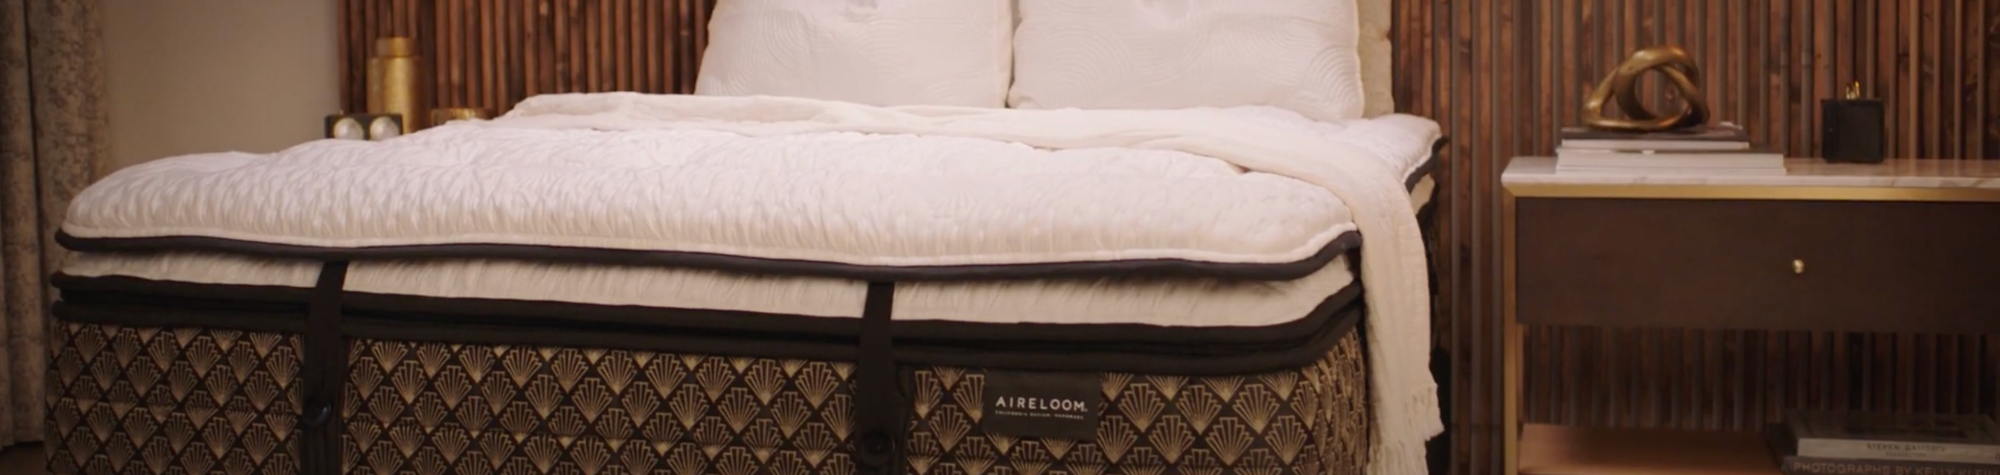 The Ultimate Sleep with Aireloom Mattresses at Mattress Warehouse